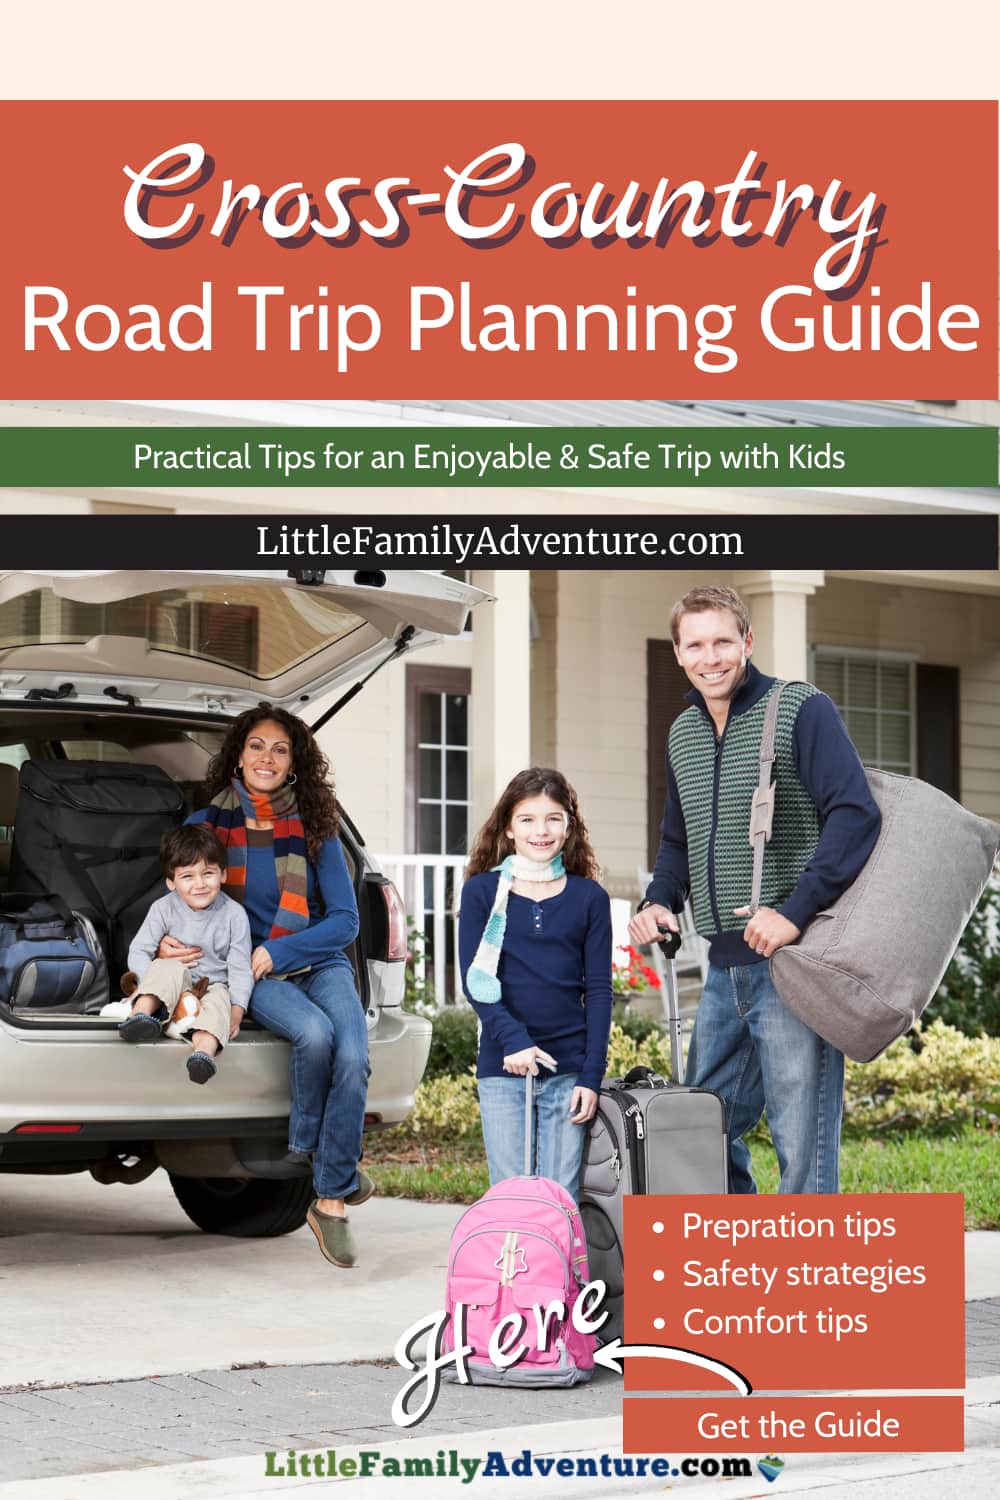 Cross Country Road Trip Planning Guide Tips